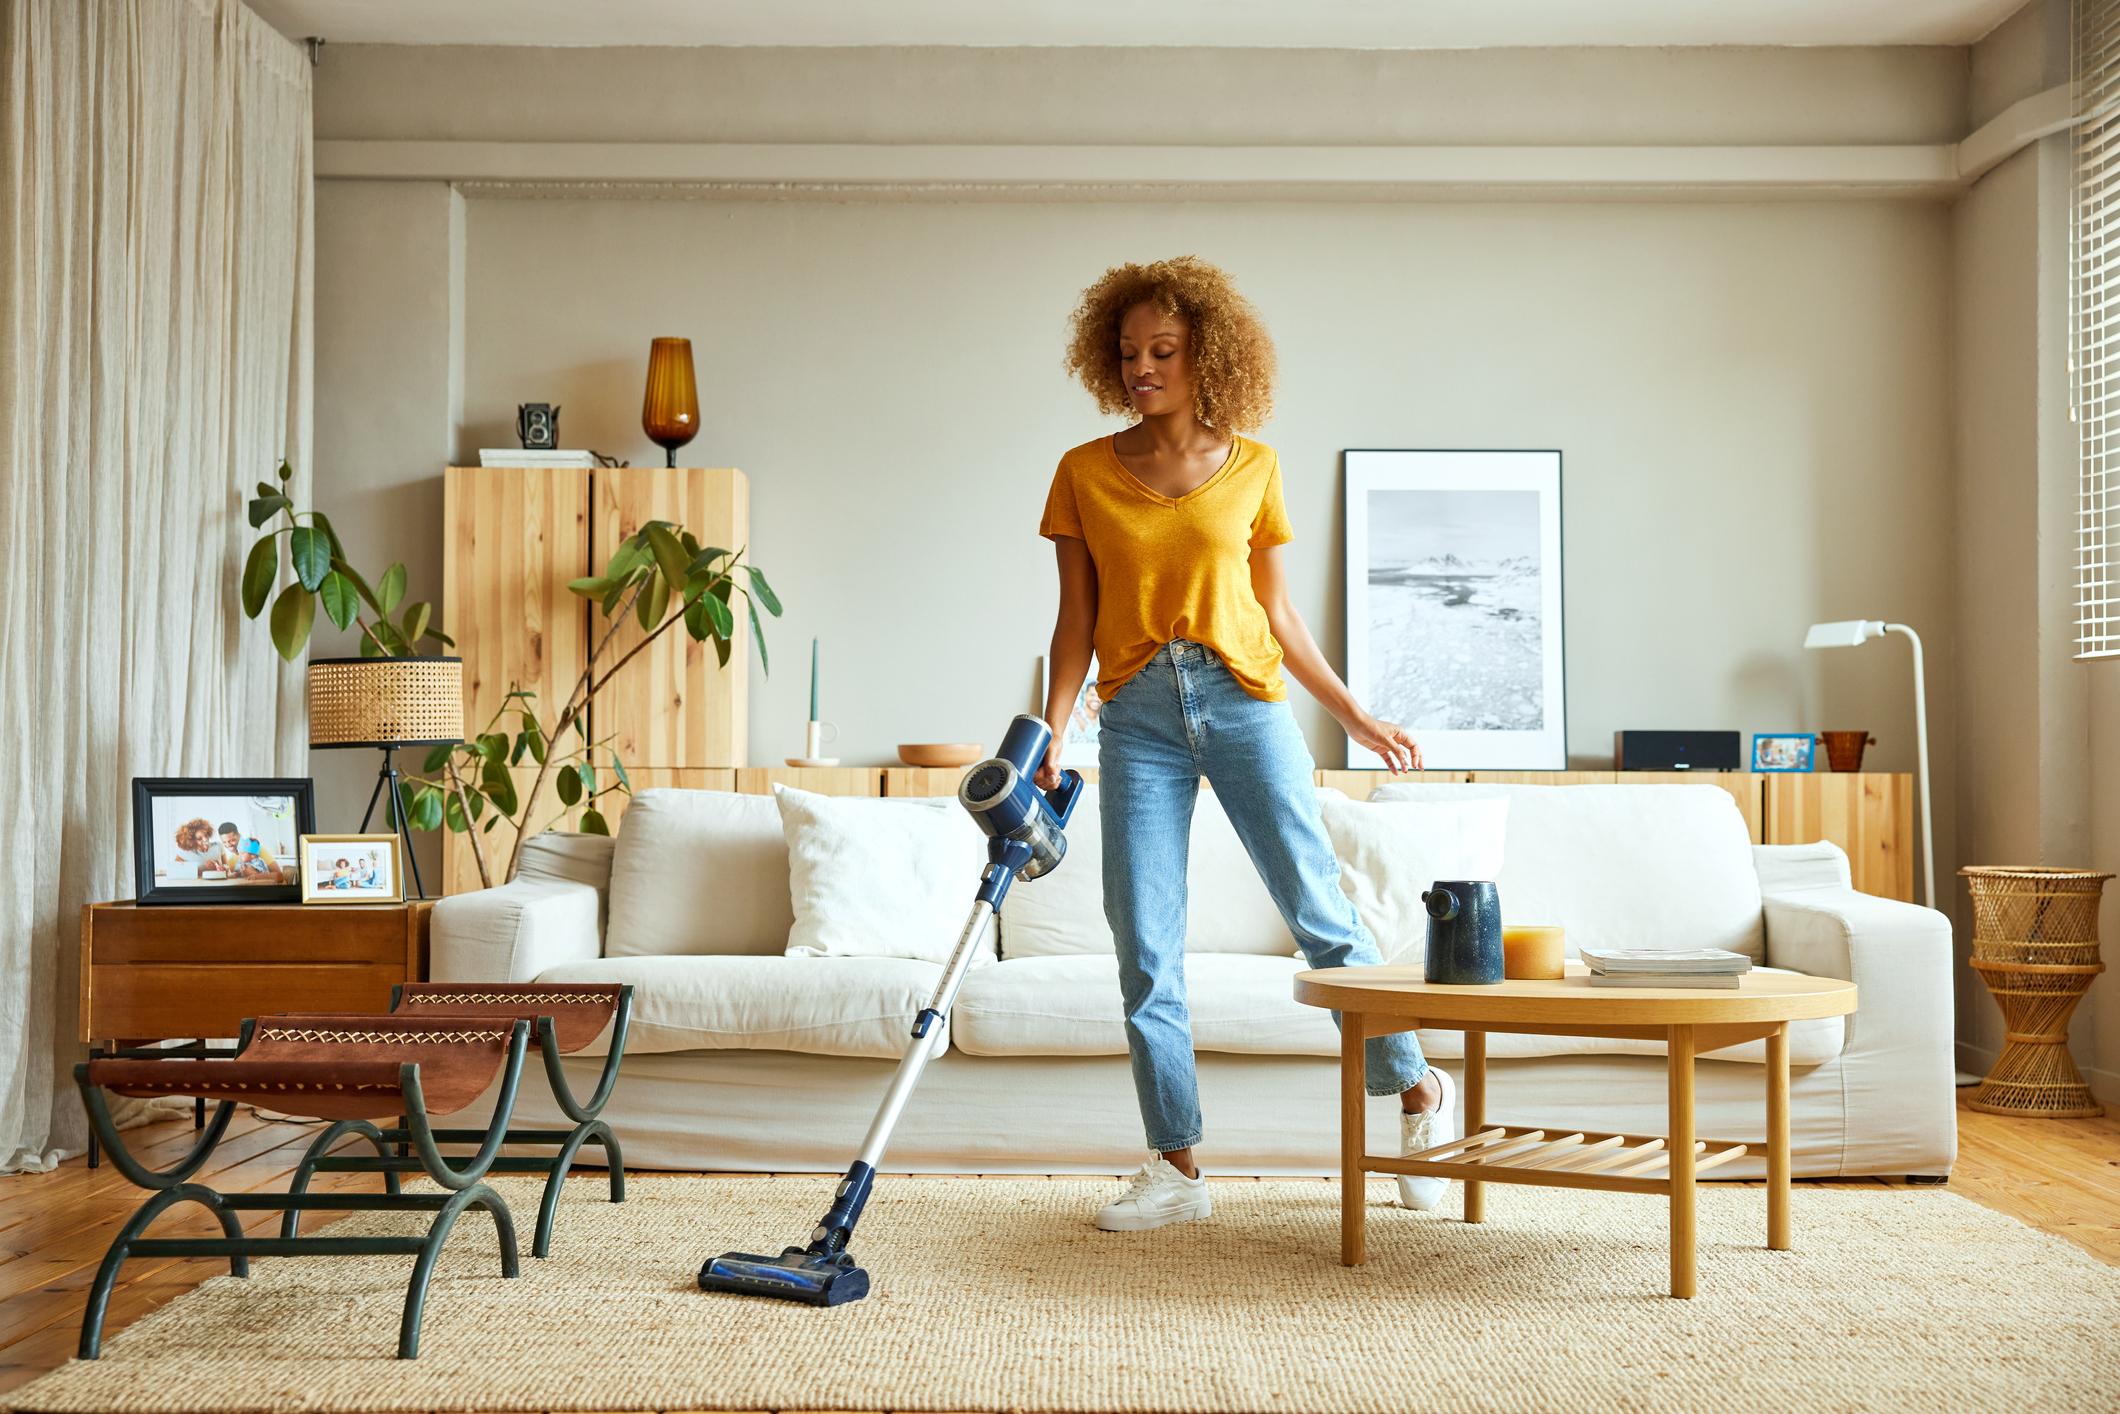  A woman cleaning a beige rug with a hoover in her home. 